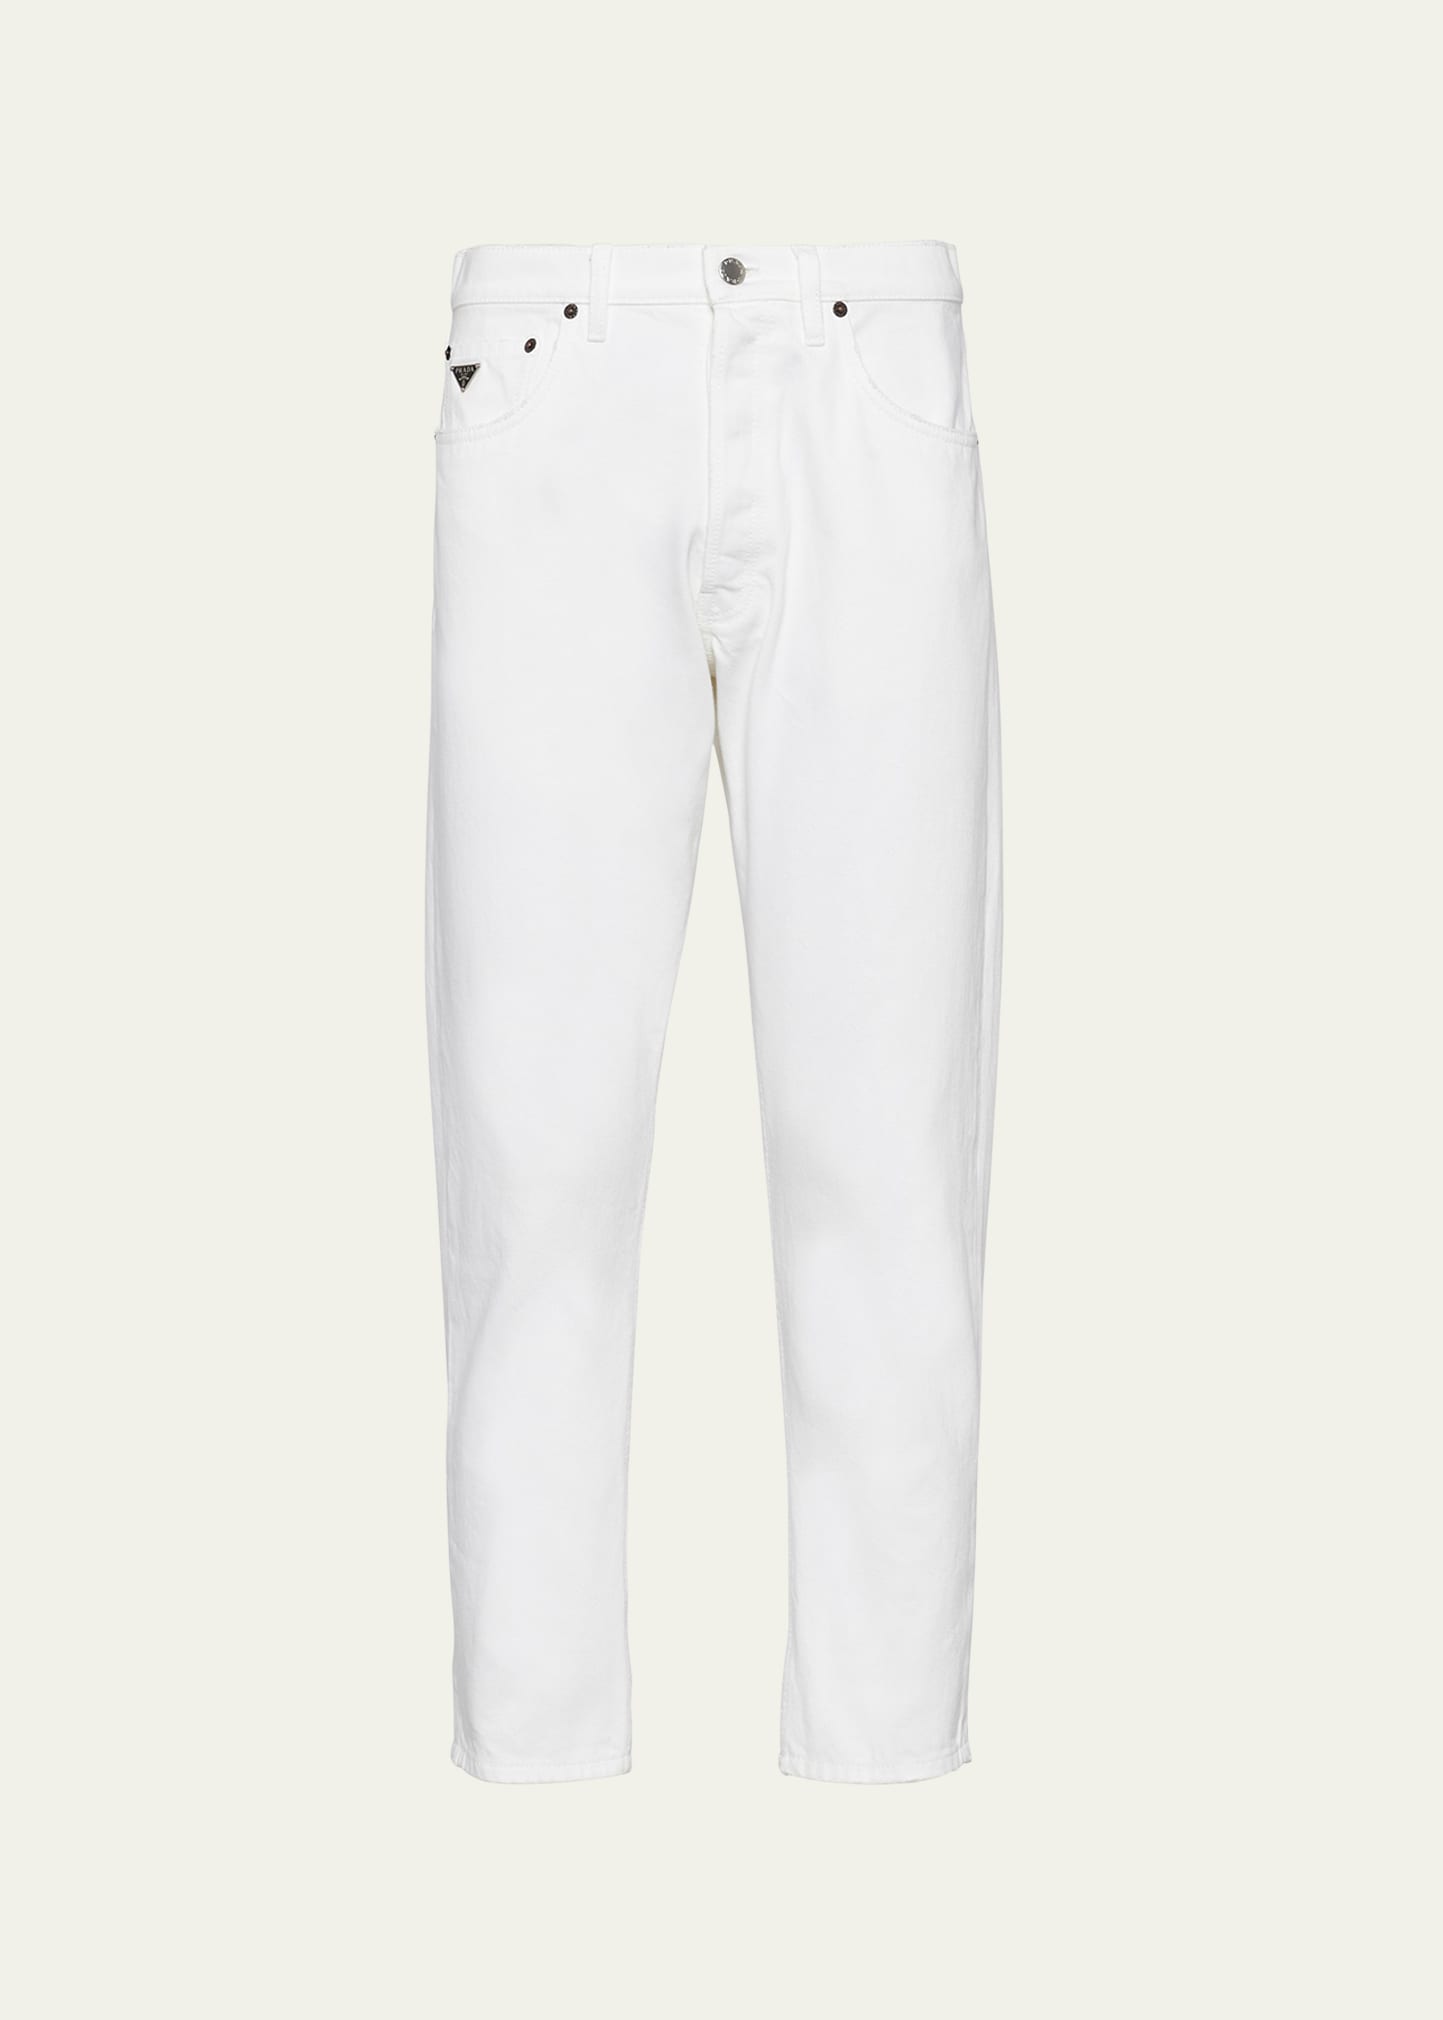 Prada Men's Cropped Jeans With Triangle Logo In White